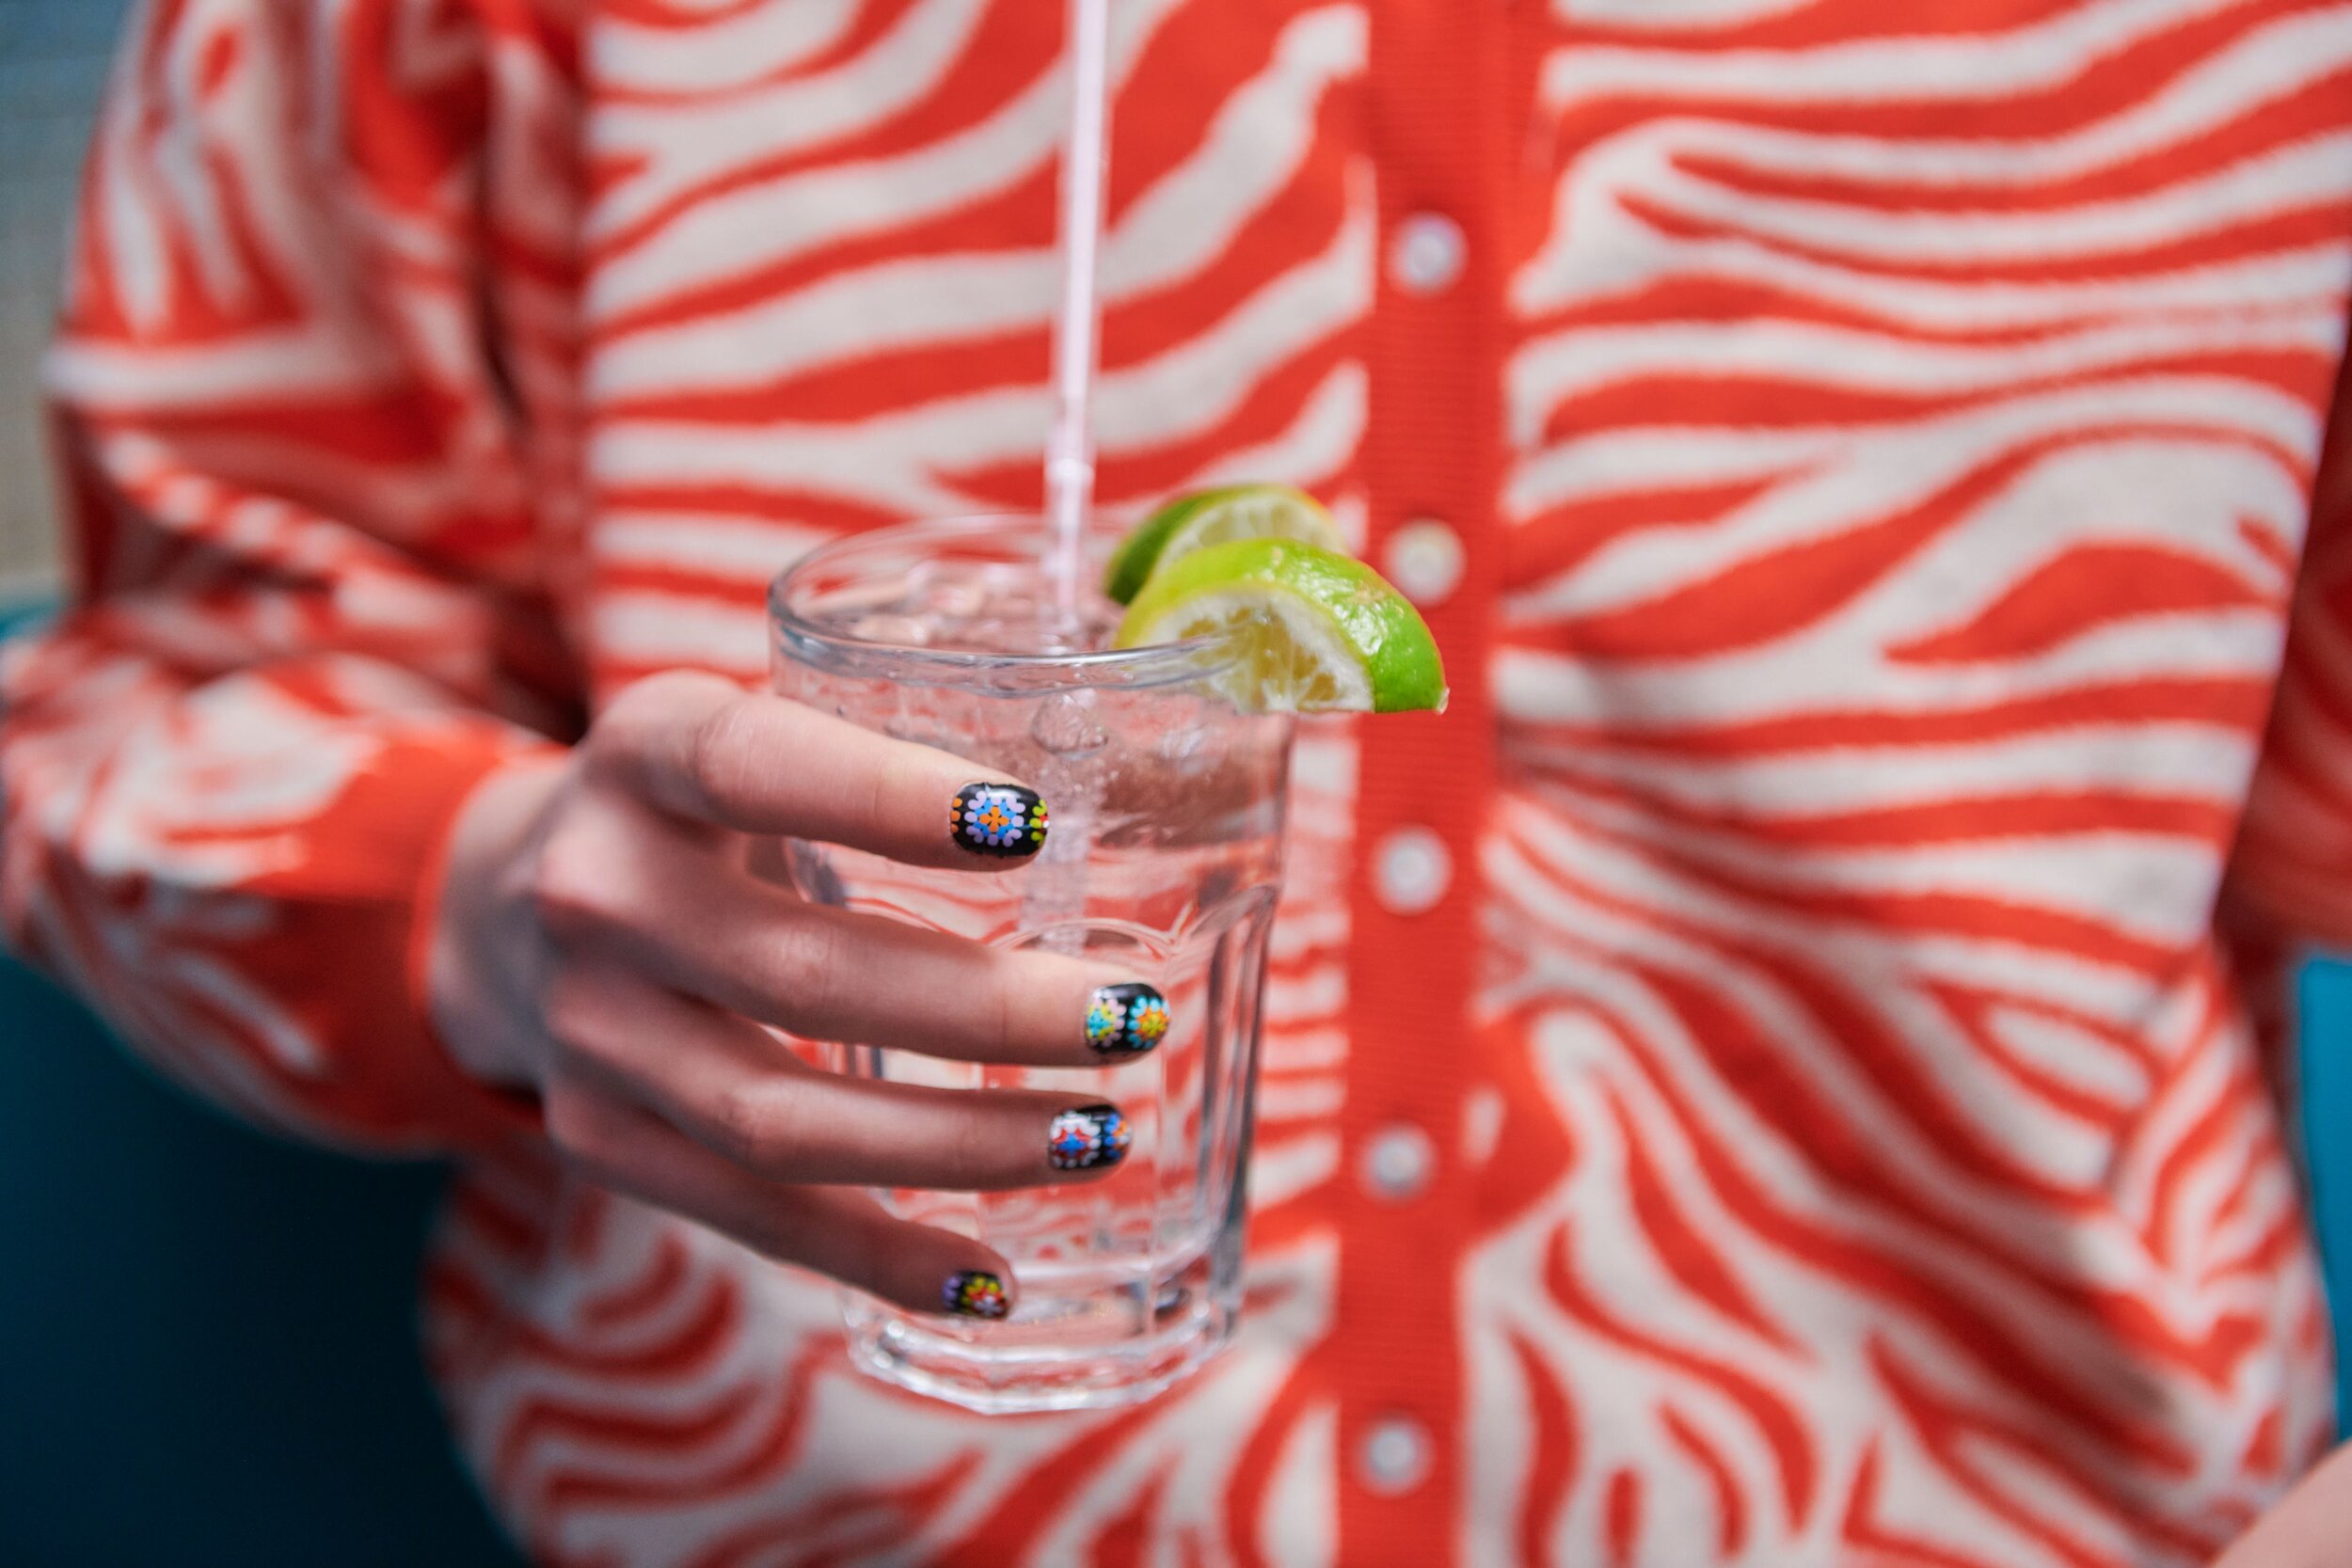 Vodka soda held by woman with decorative nails